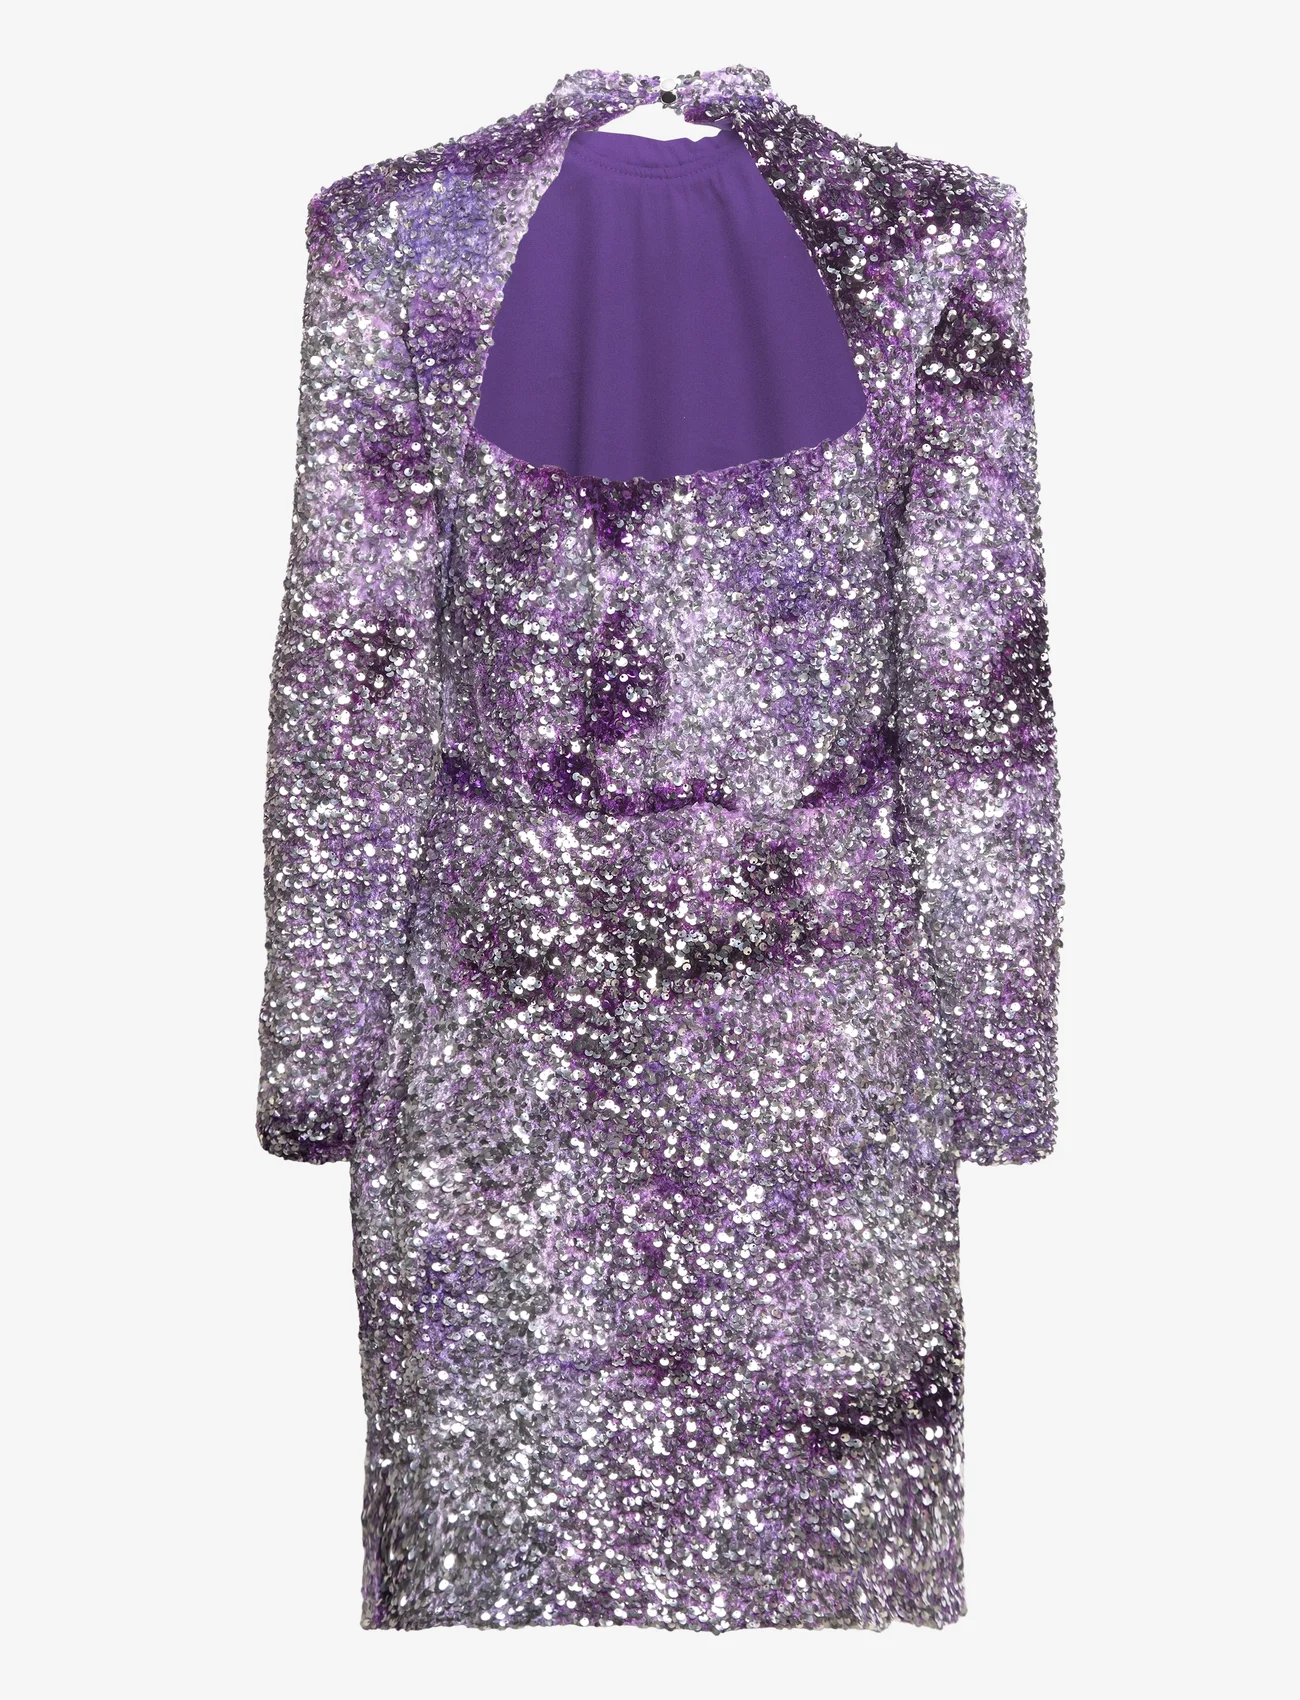 BOSS - C_Dailettes - party wear at outlet prices - open purple - 1